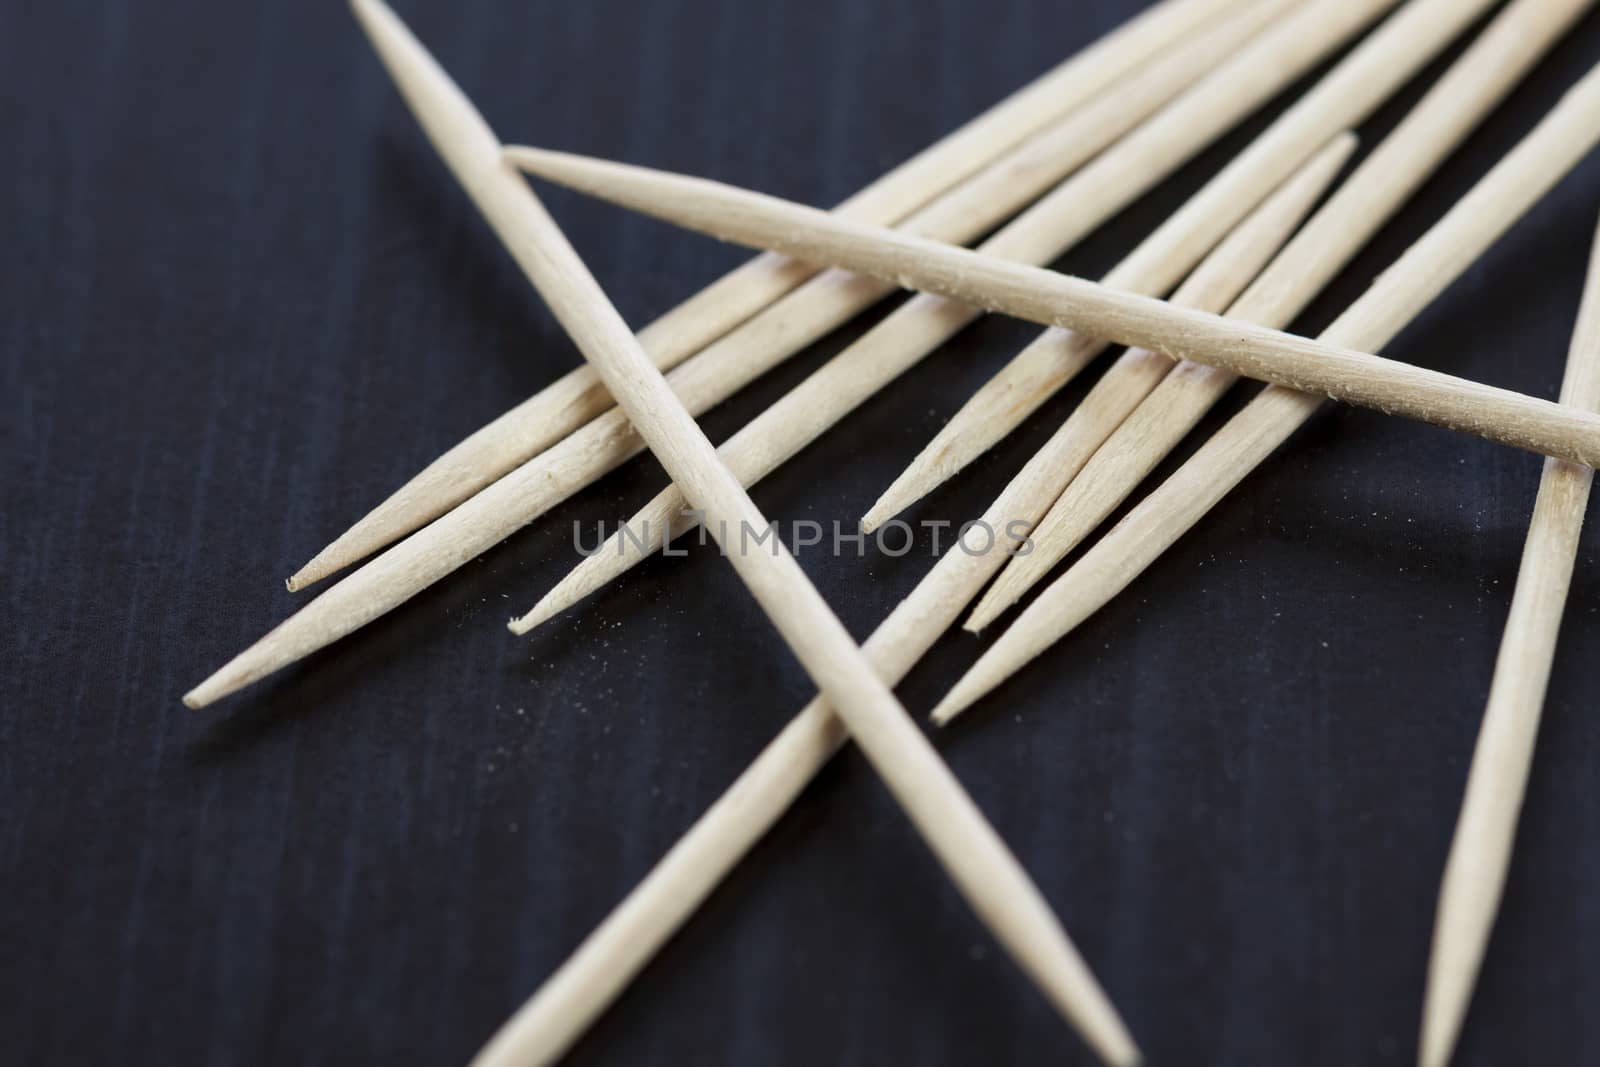 Pile of wooden toothpicks scattered randomly on a grey background for cleaning between the teeth after a meal in a personal hygiene concept